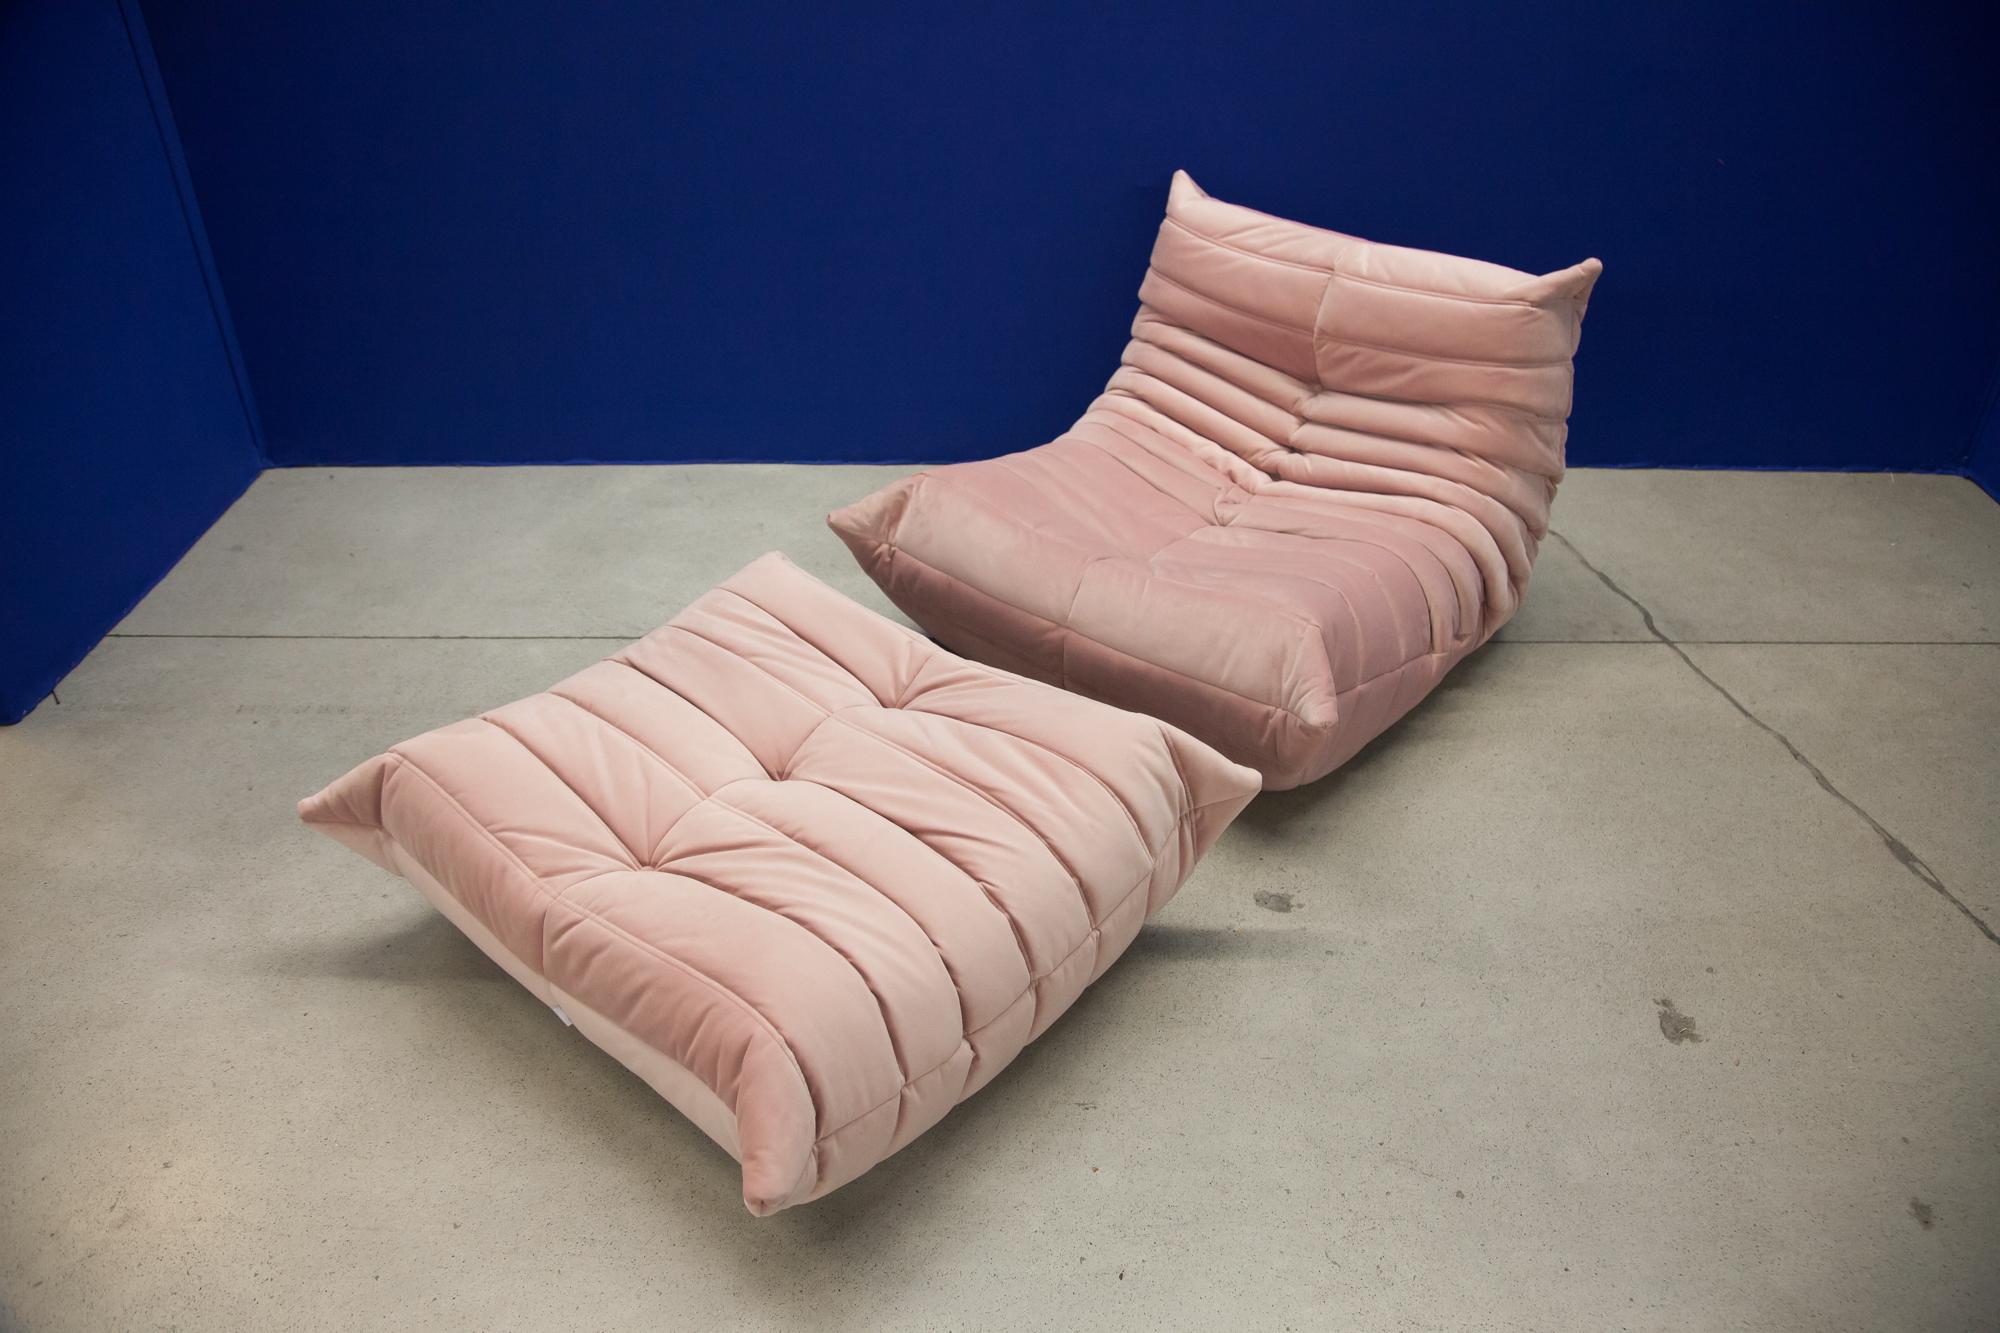 This Togo living room set was designed by Michel Ducaroy in 1973 and was manufactured by Ligne Roset in France. It has been reupholstered in pink high quality velvet, and is made up of the following pieces, each with the original Ligne Roset logo